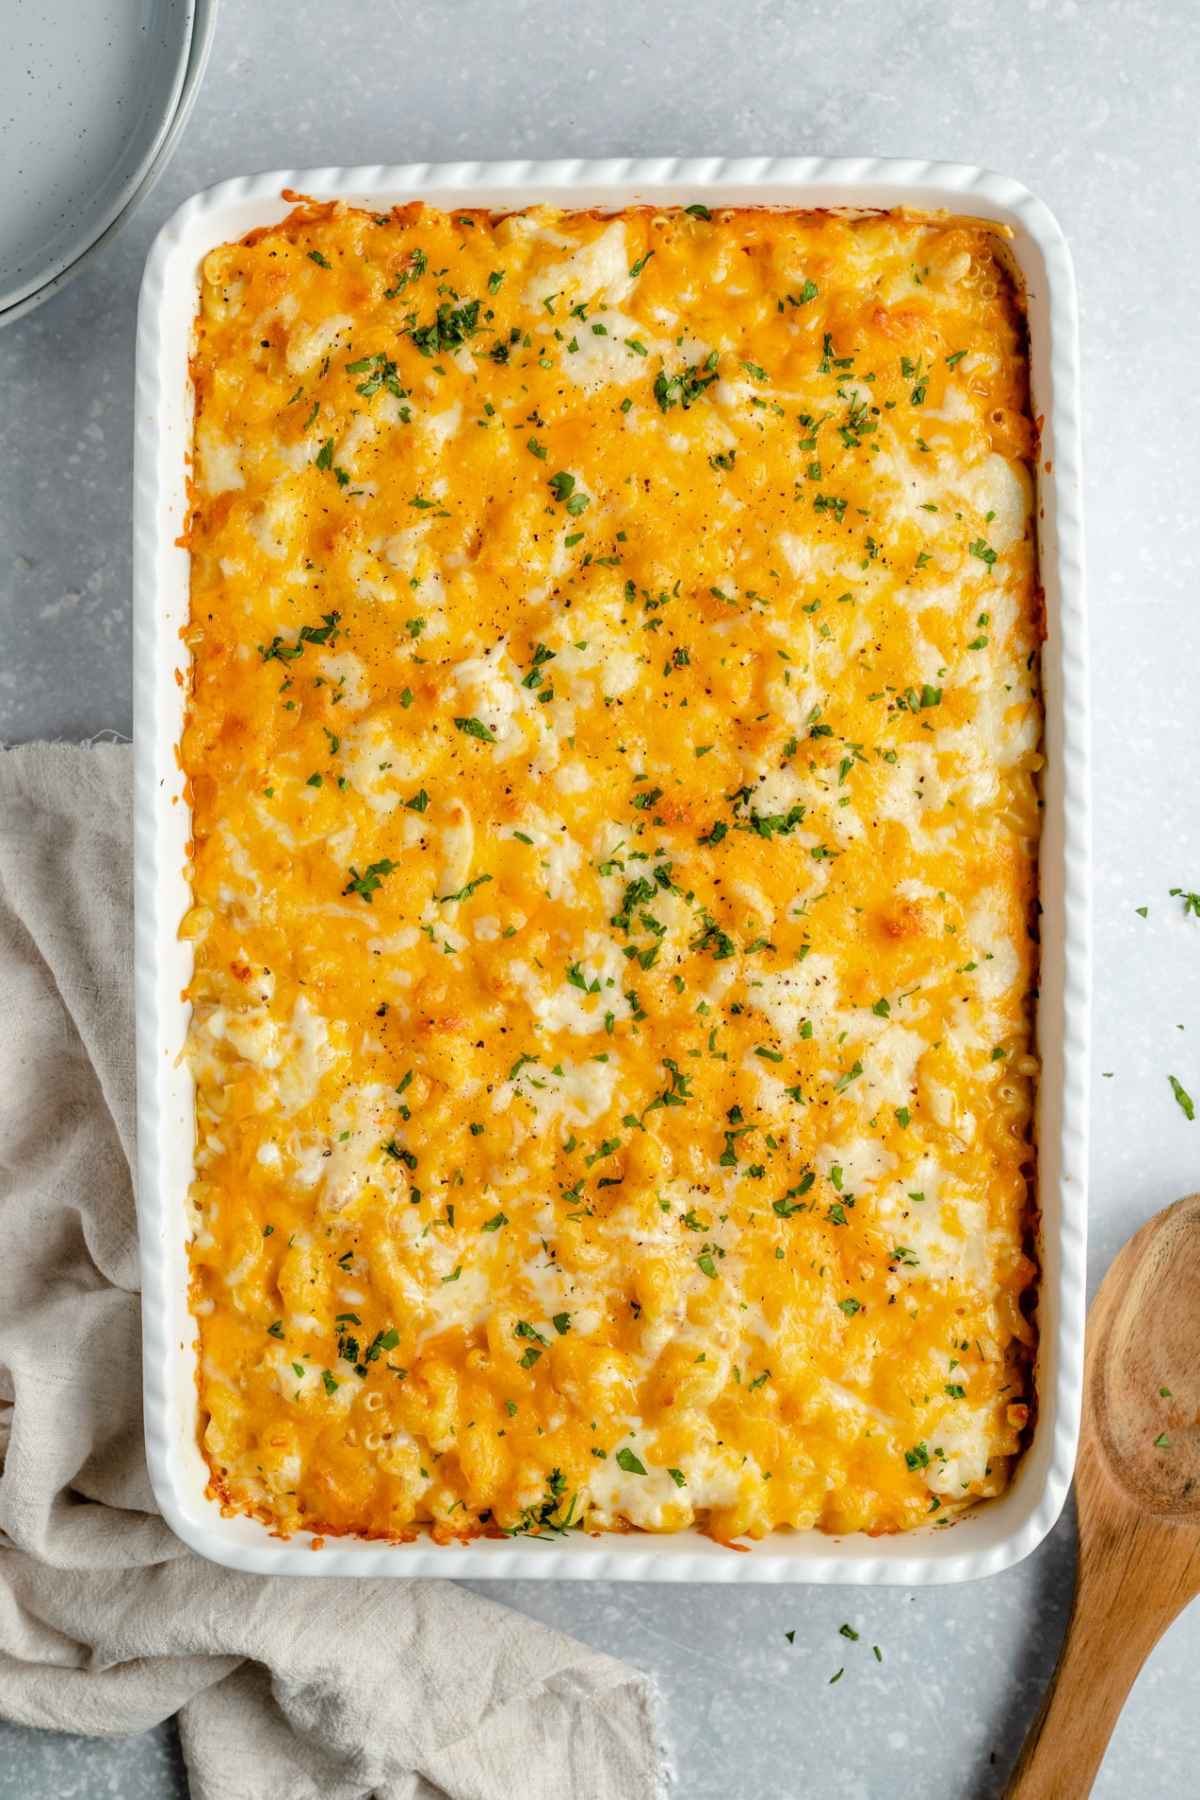 Baked Mac and cheese garnished with chopped parsley in white dish.